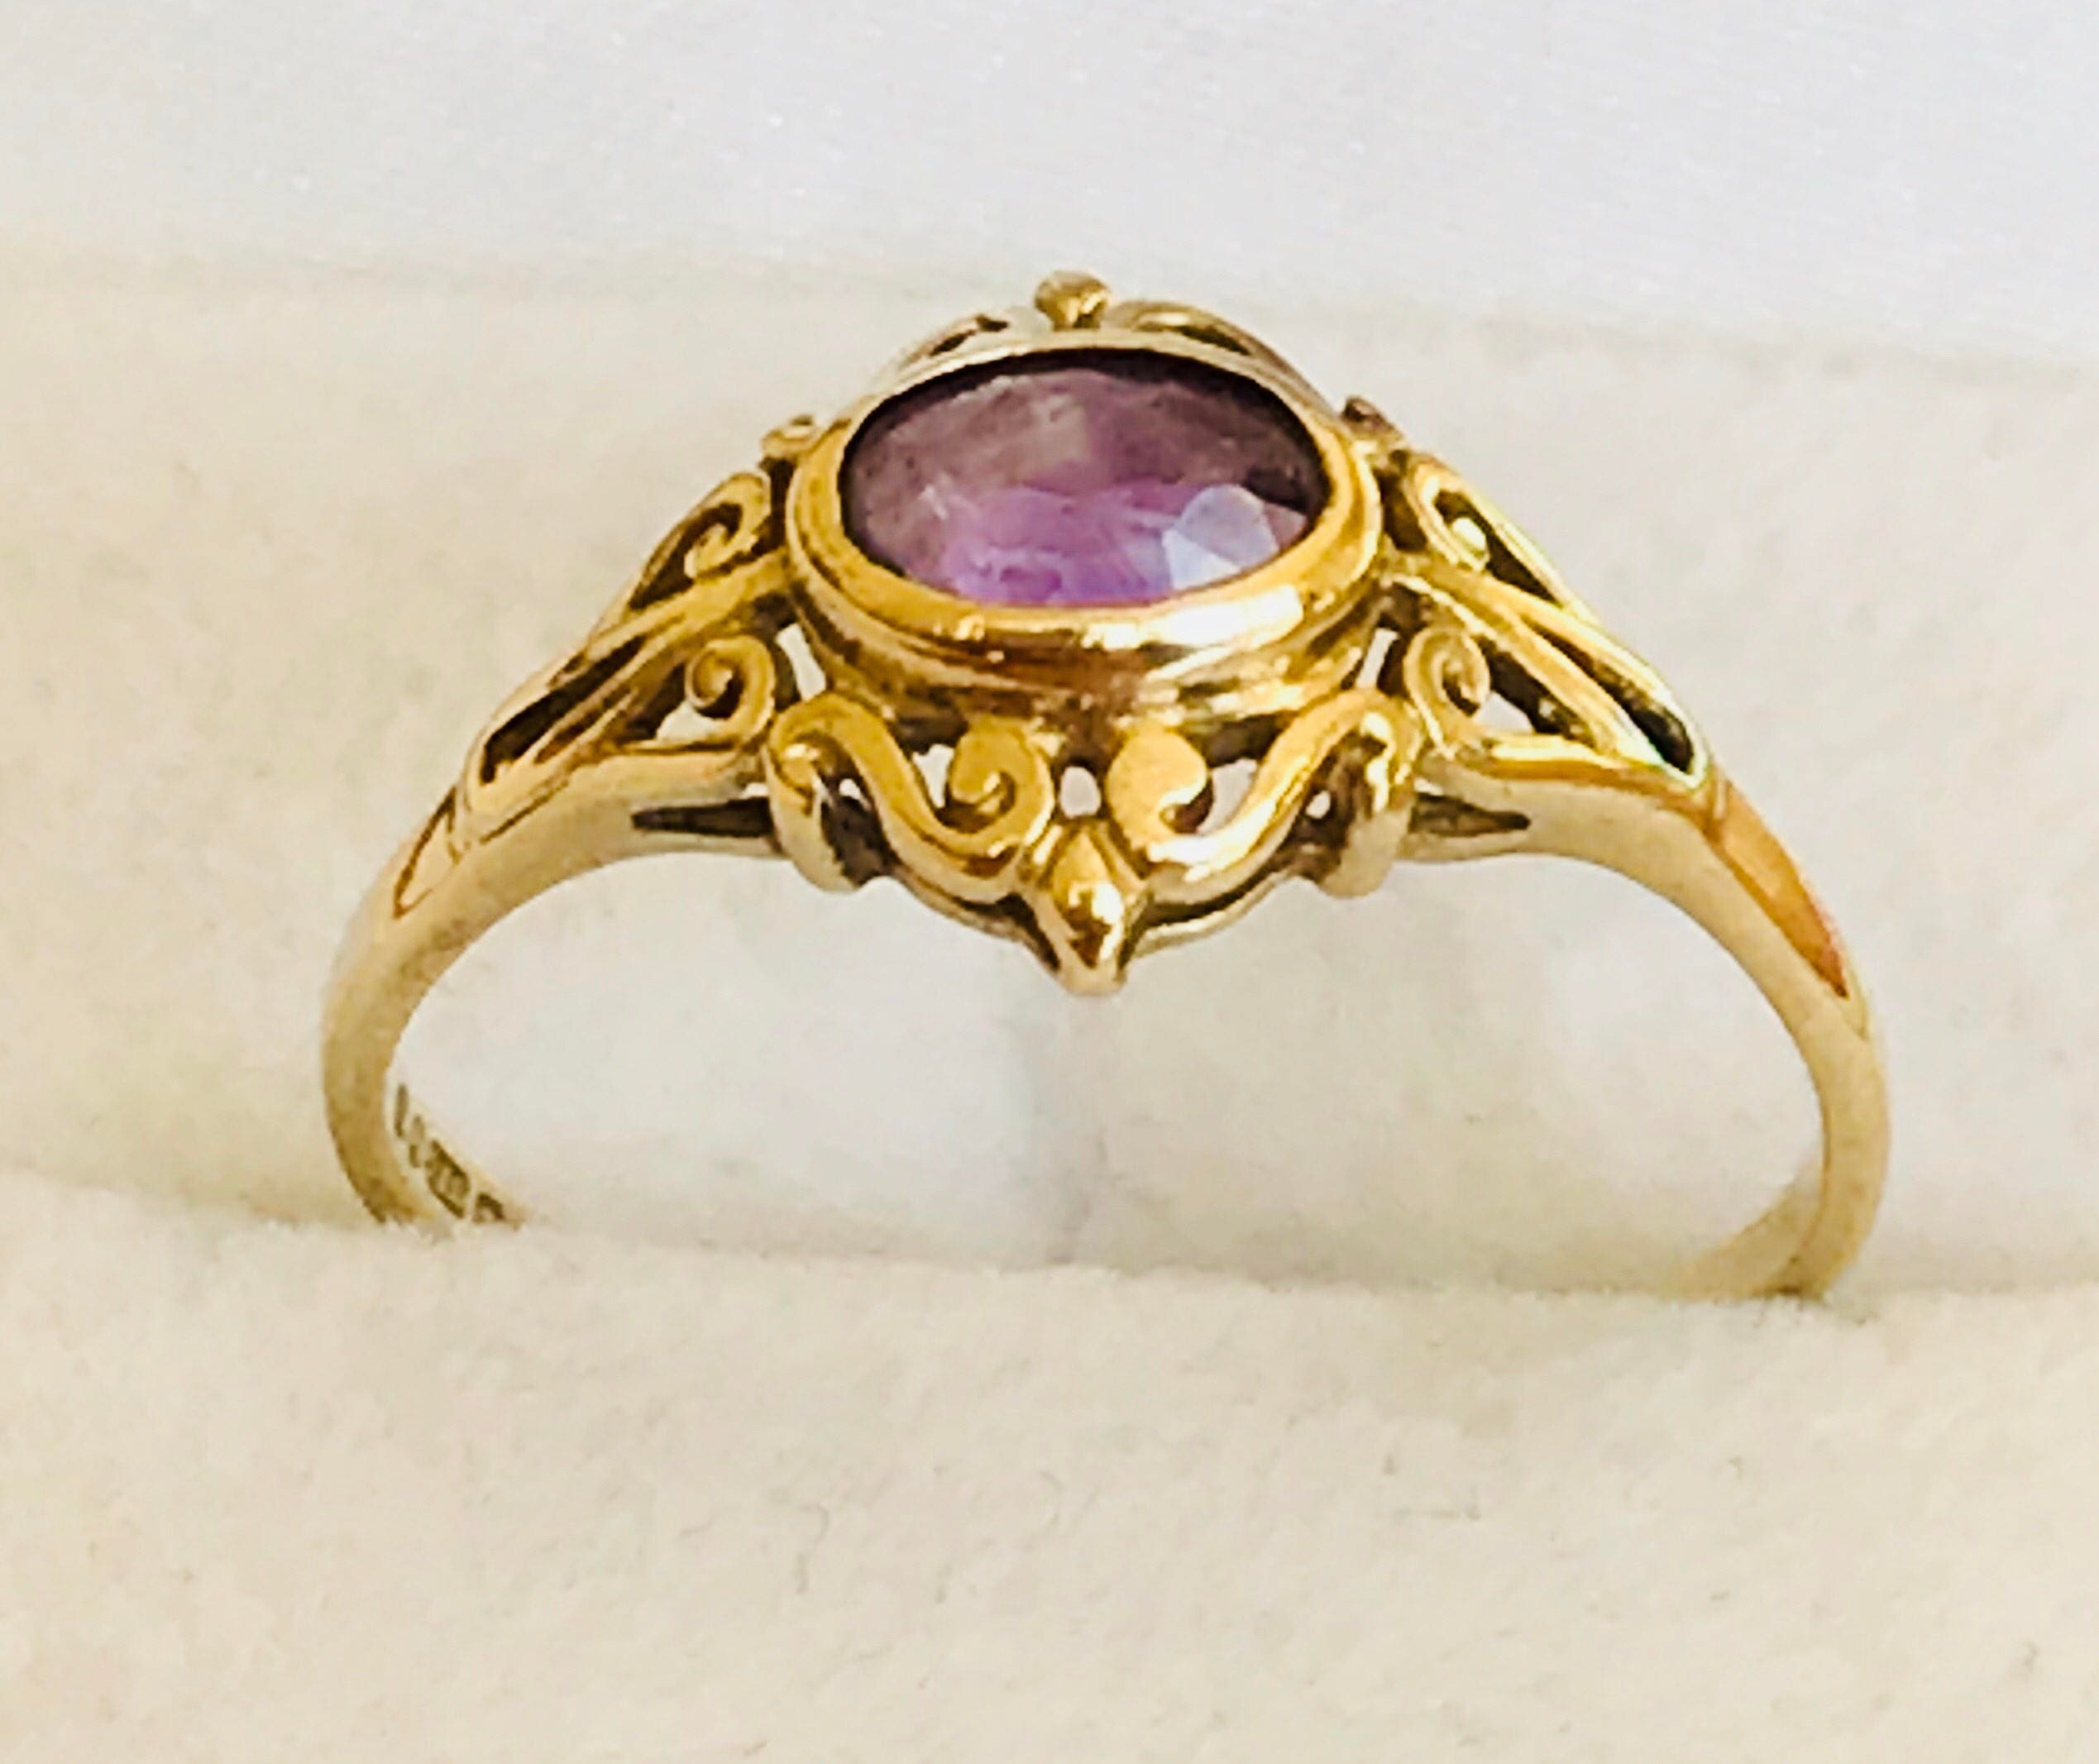 Stunning vintage 9ct gold Amethyst solitaire ring - 1989